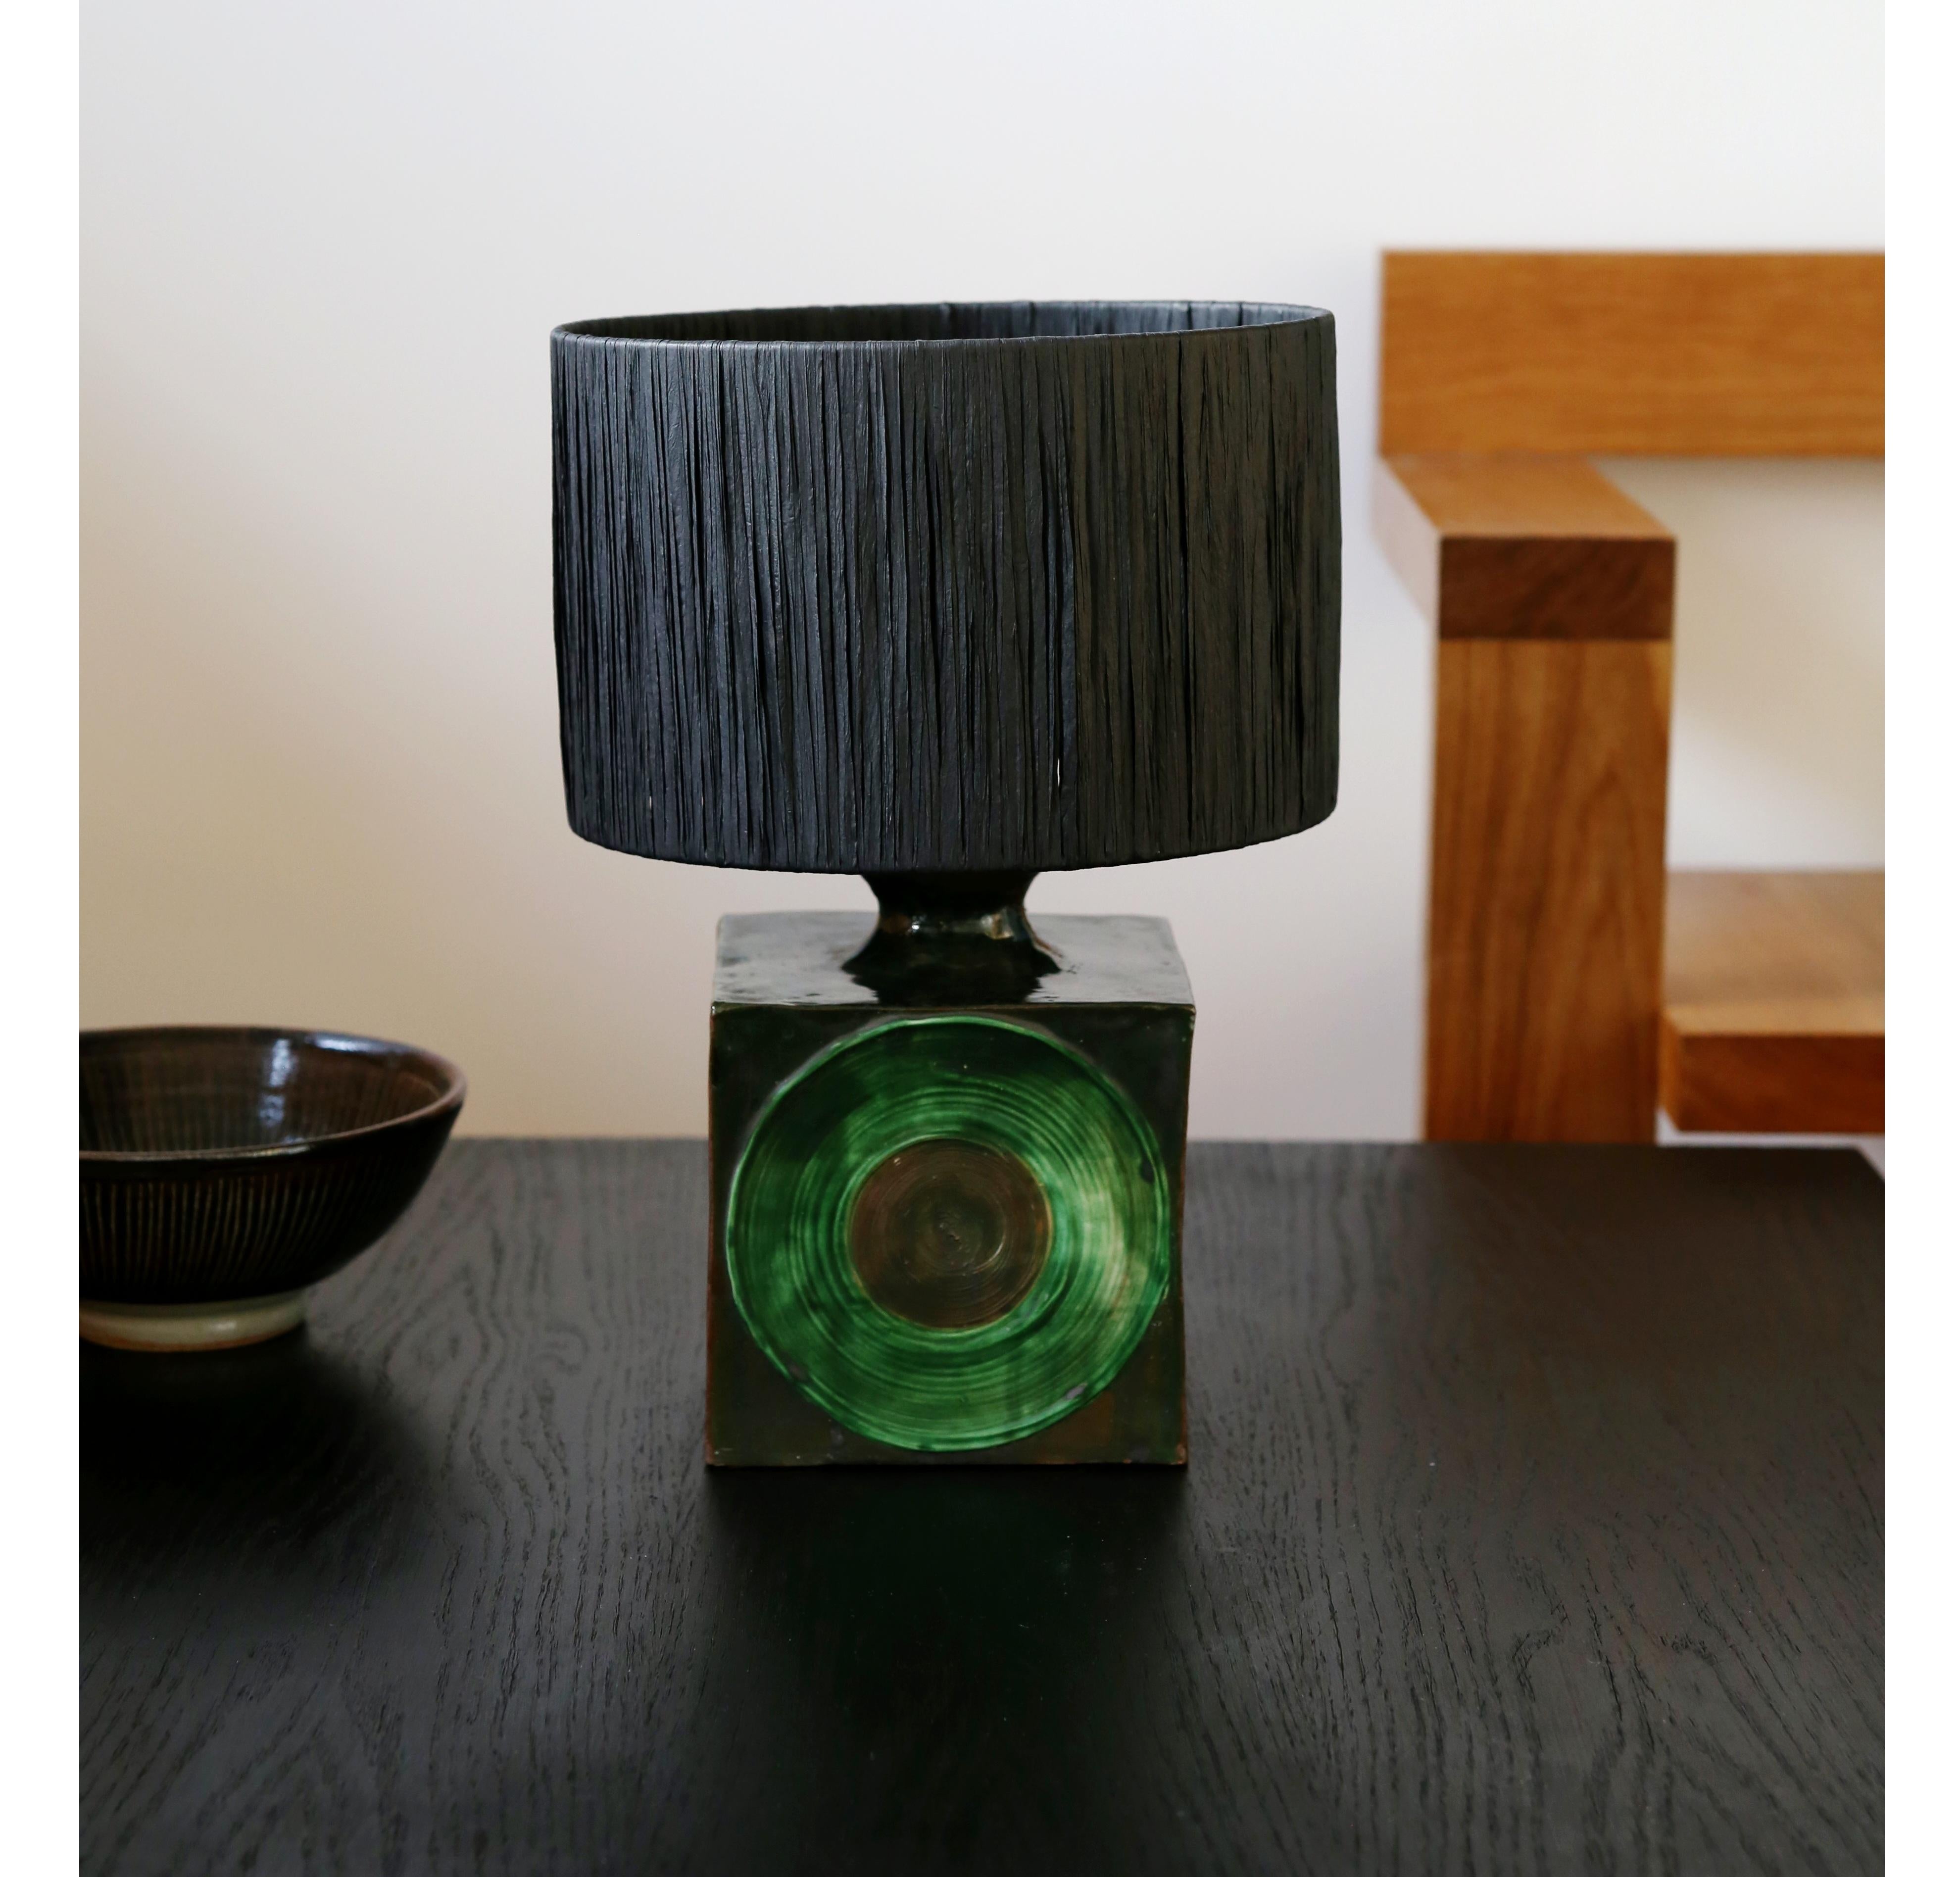 Fabulous 1970s statement studio pottery table lamp with a black raffia drum shade (the shade is new)

A heavy square lamp base with a brown and green over all mottled glaze and featuring a striking green lightly textured circle motif on the front of